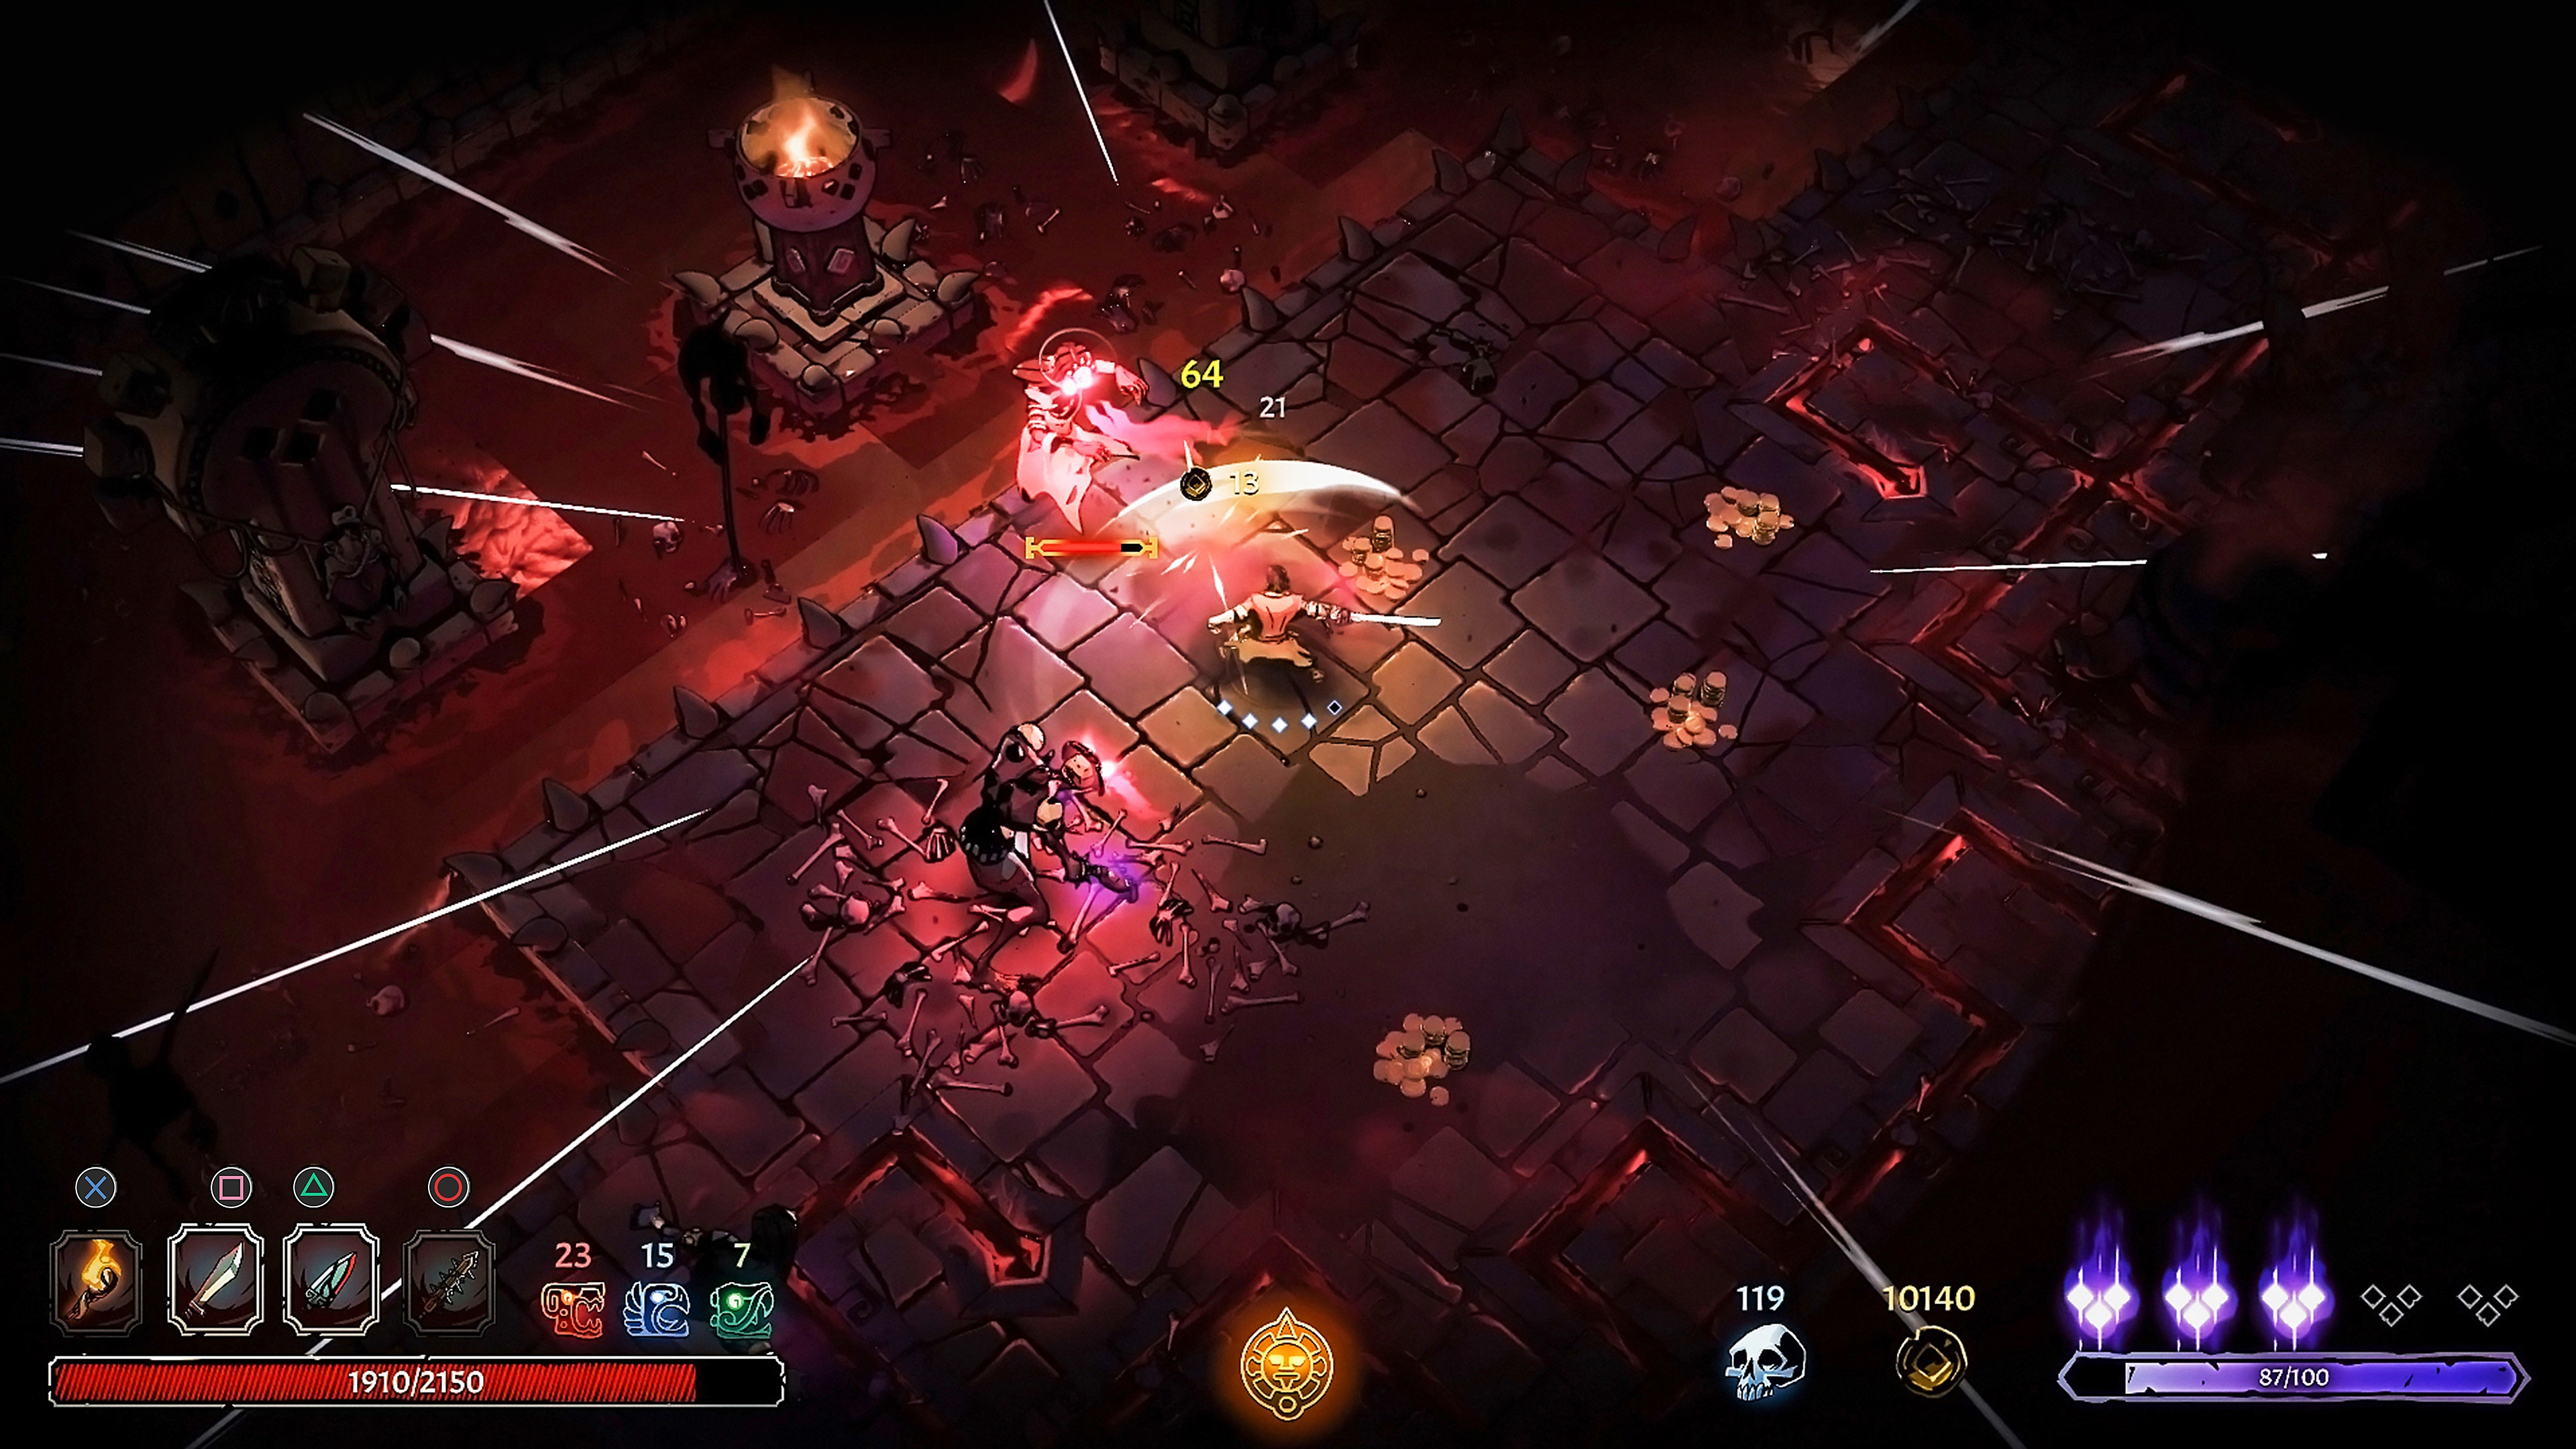 Curse of the Dead gods screenshot showing combat gameplay